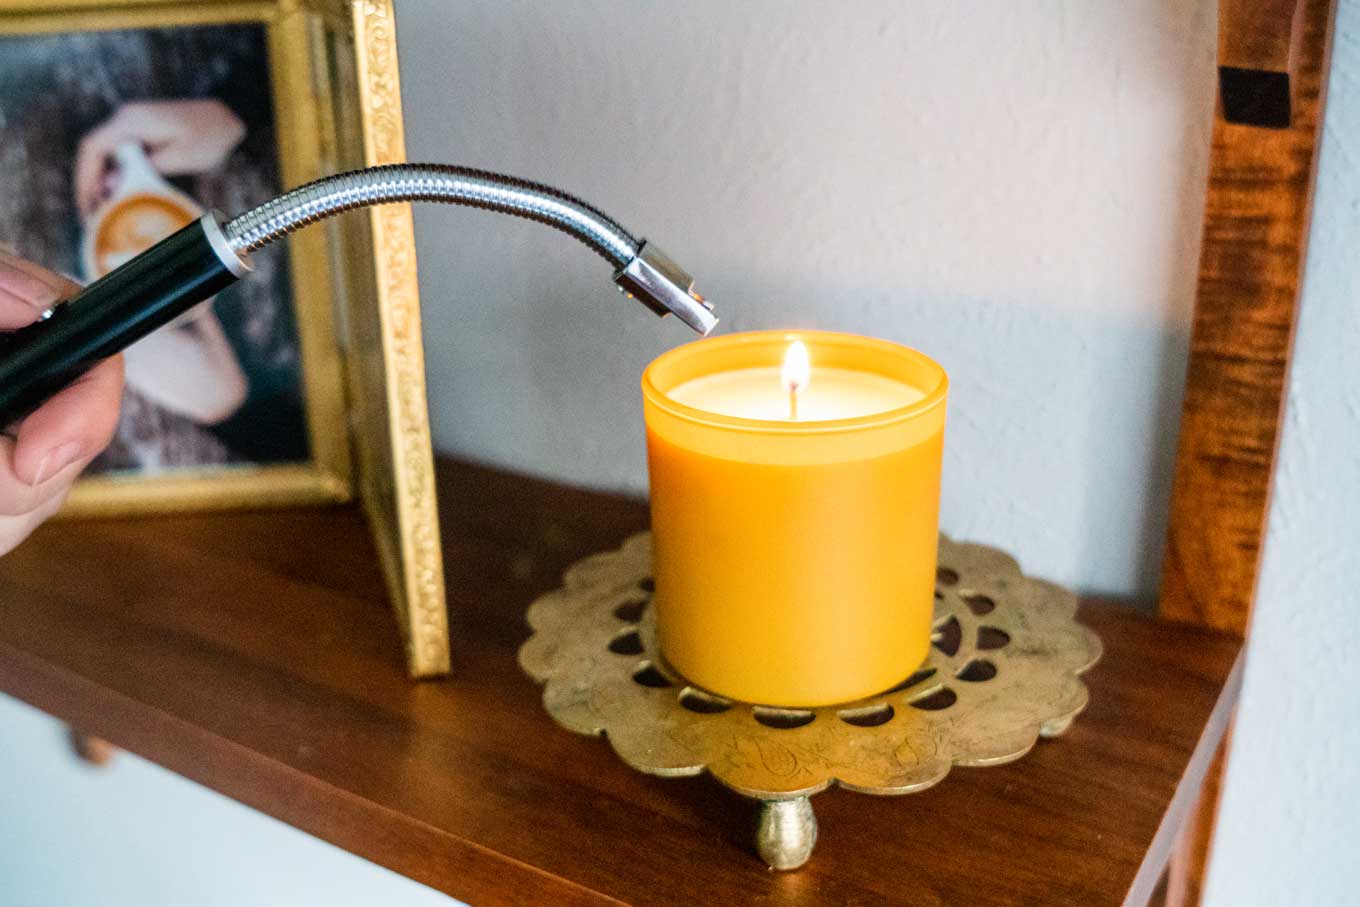 A rechargeable electric lighter with a flexible neck, lighting a candle